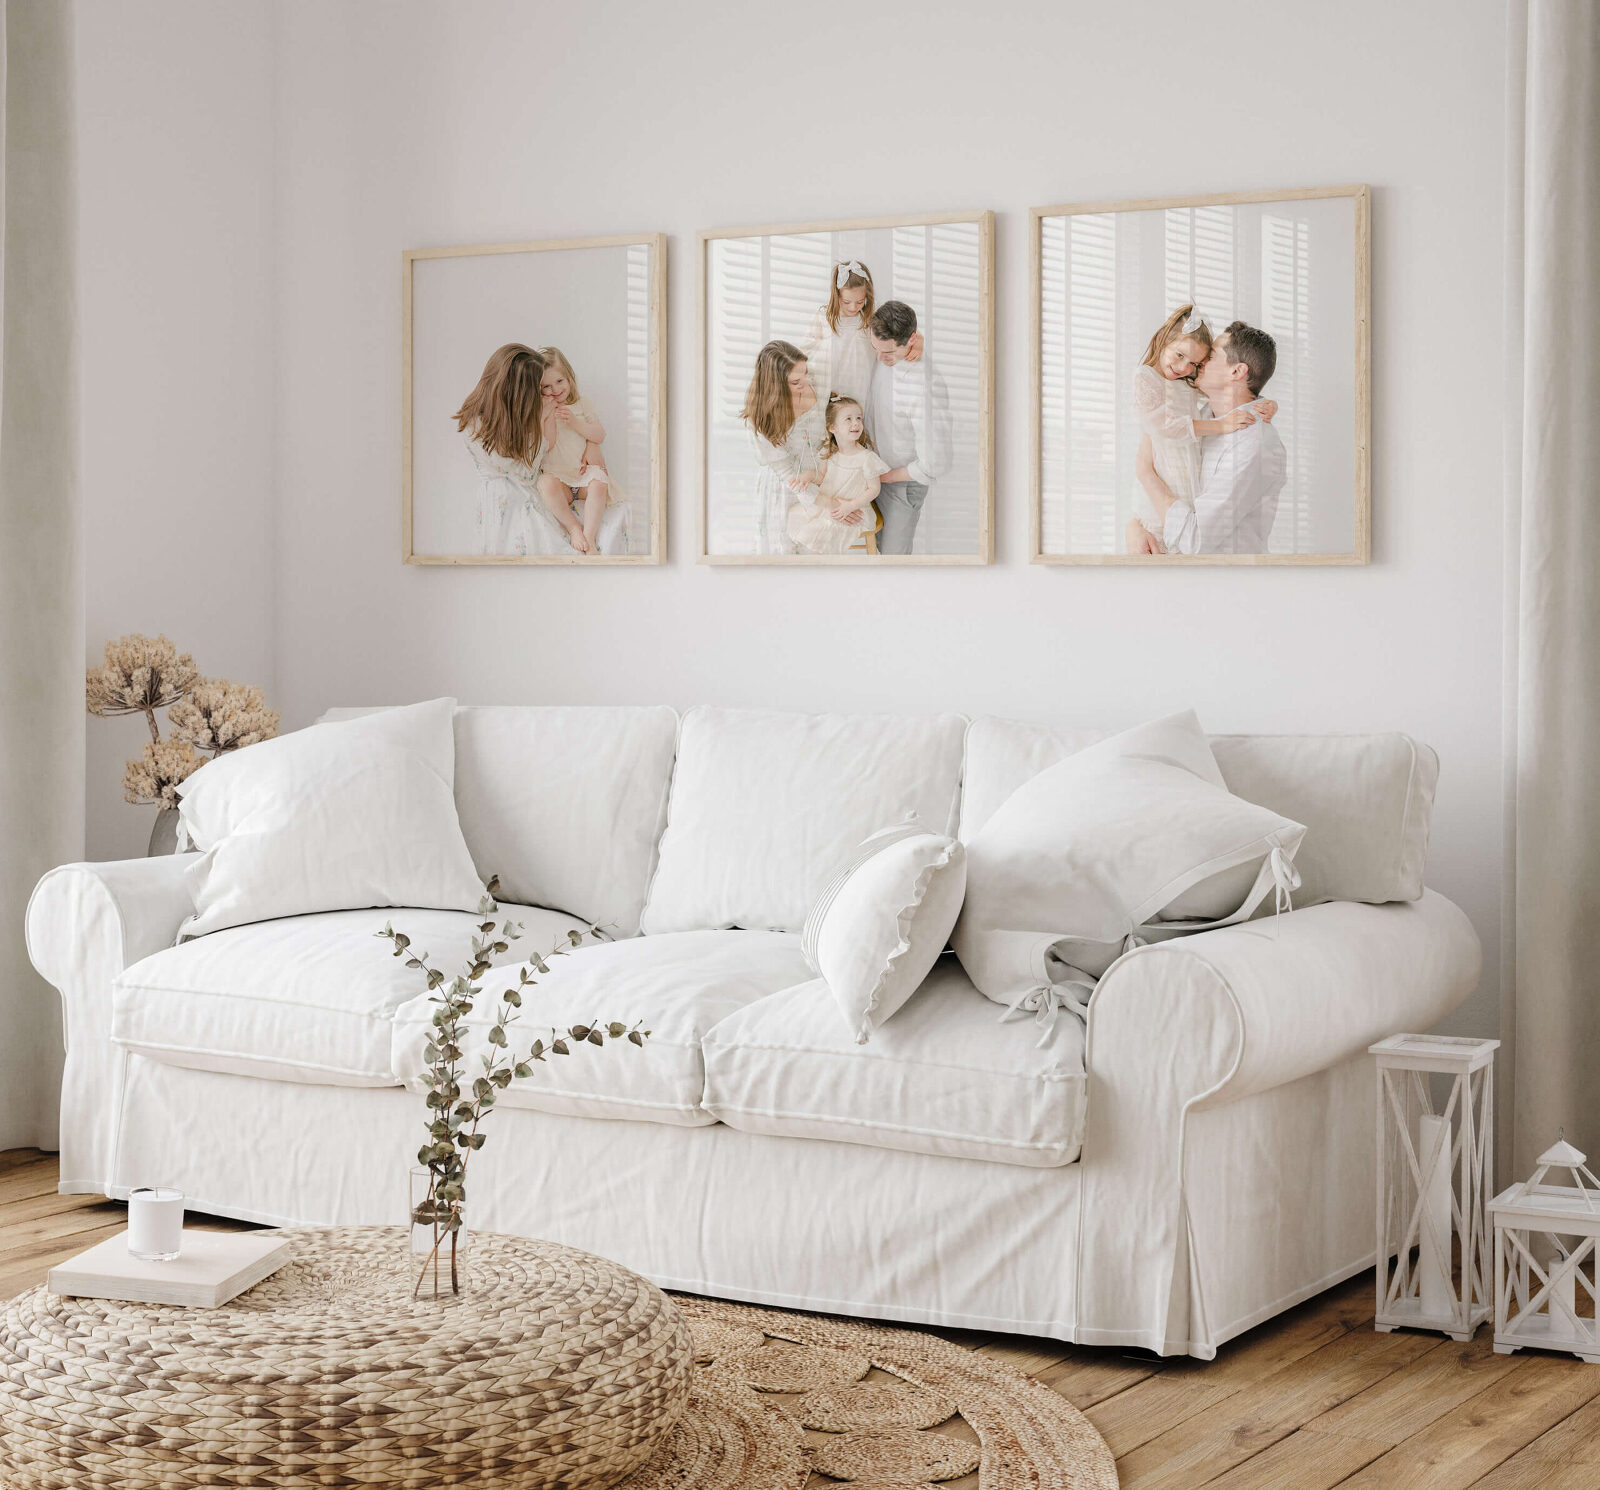 Local Omaha family displays their framed artwork above a white couch